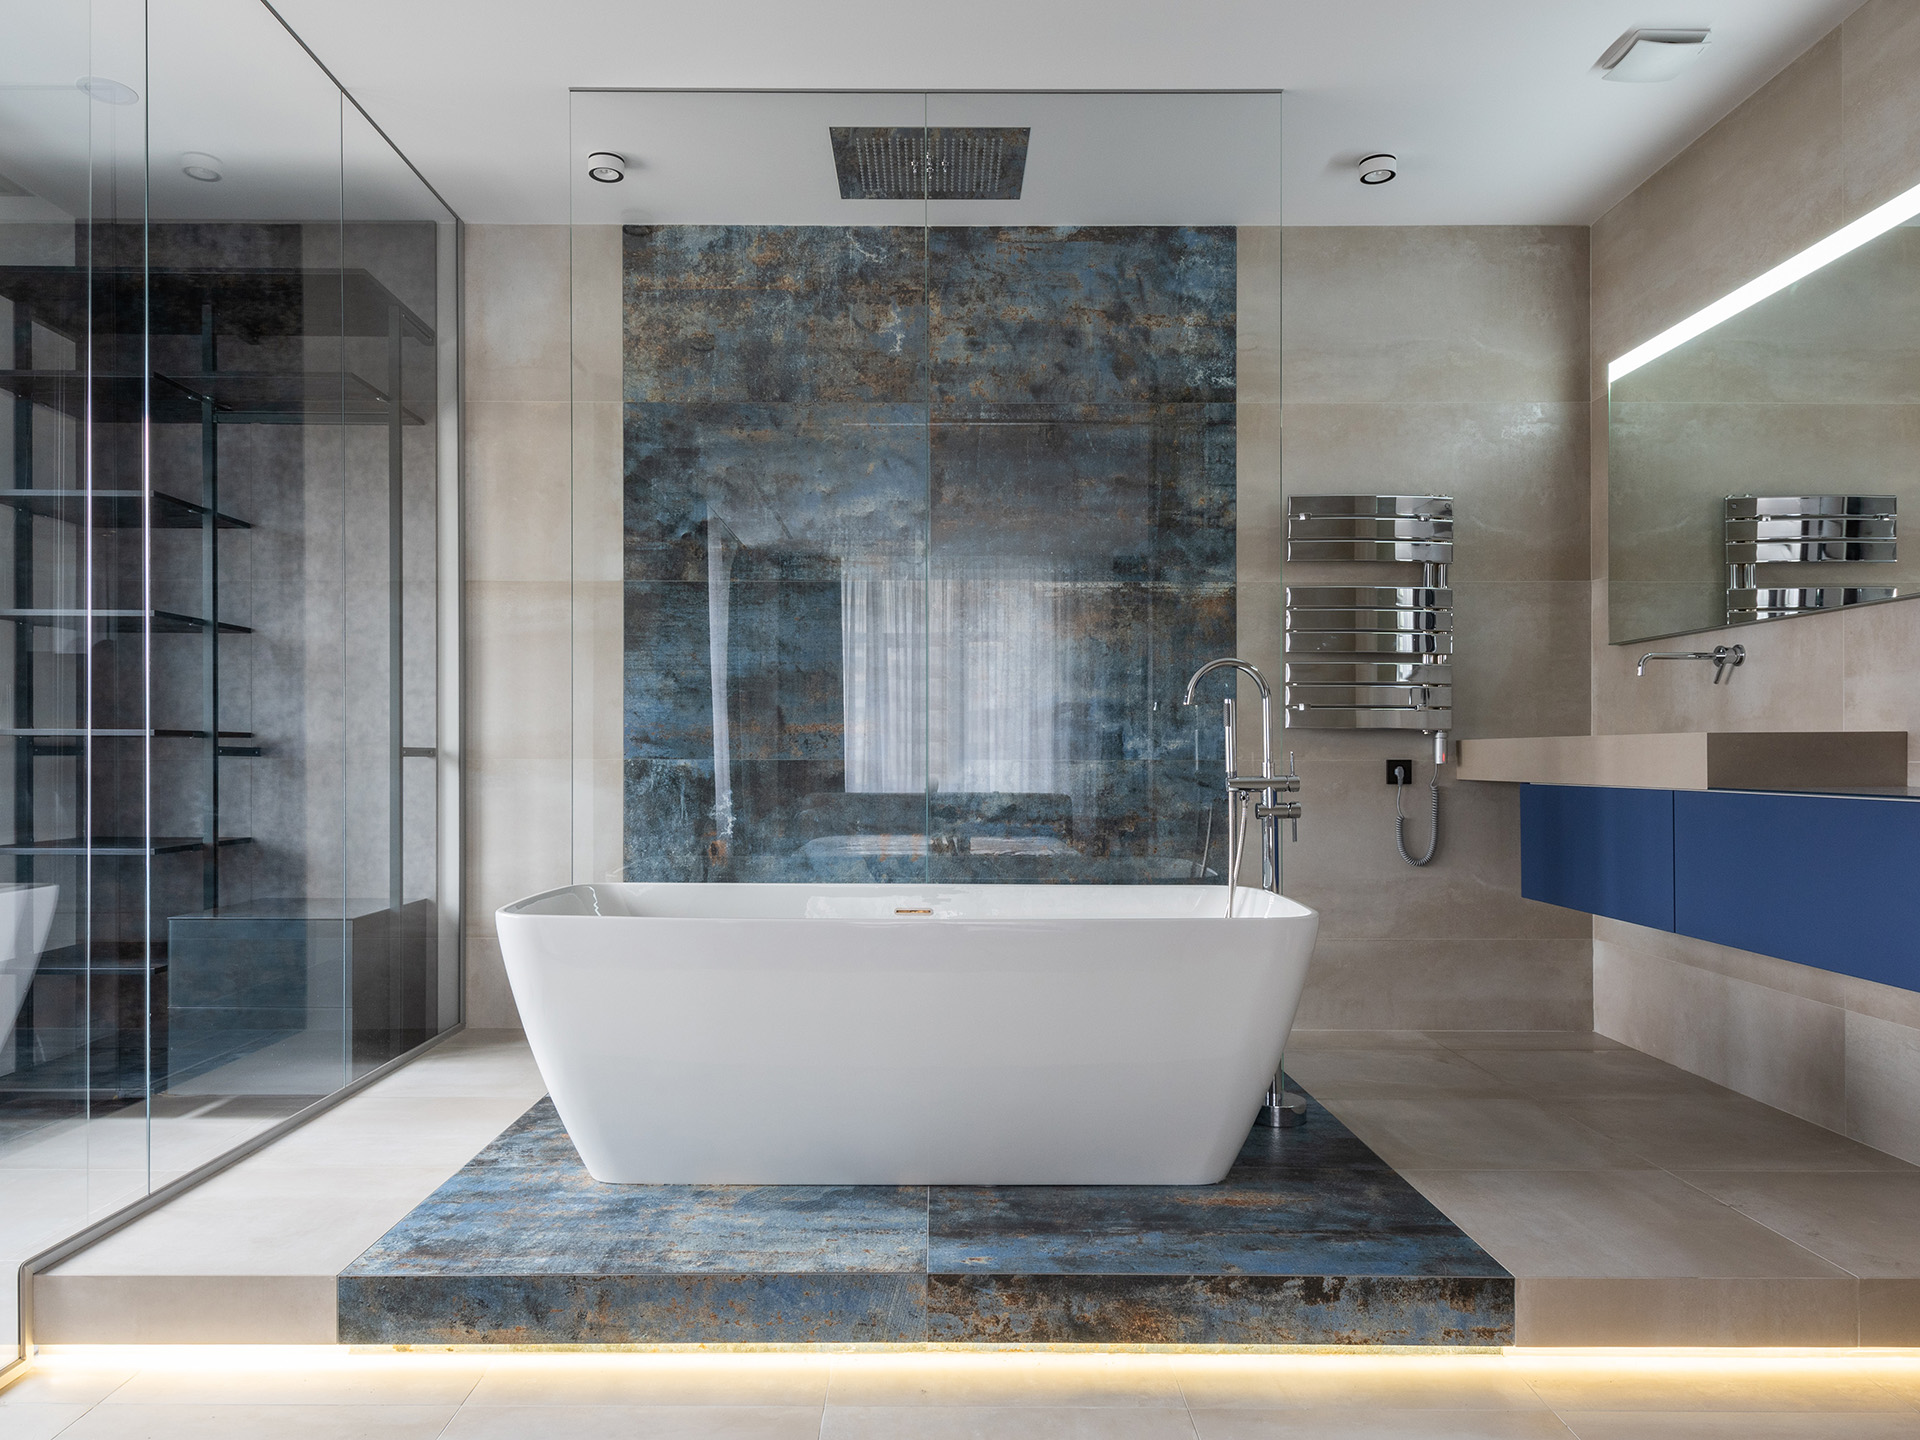 The bathroom as a luxury space: Marble as a design feature for design lovers